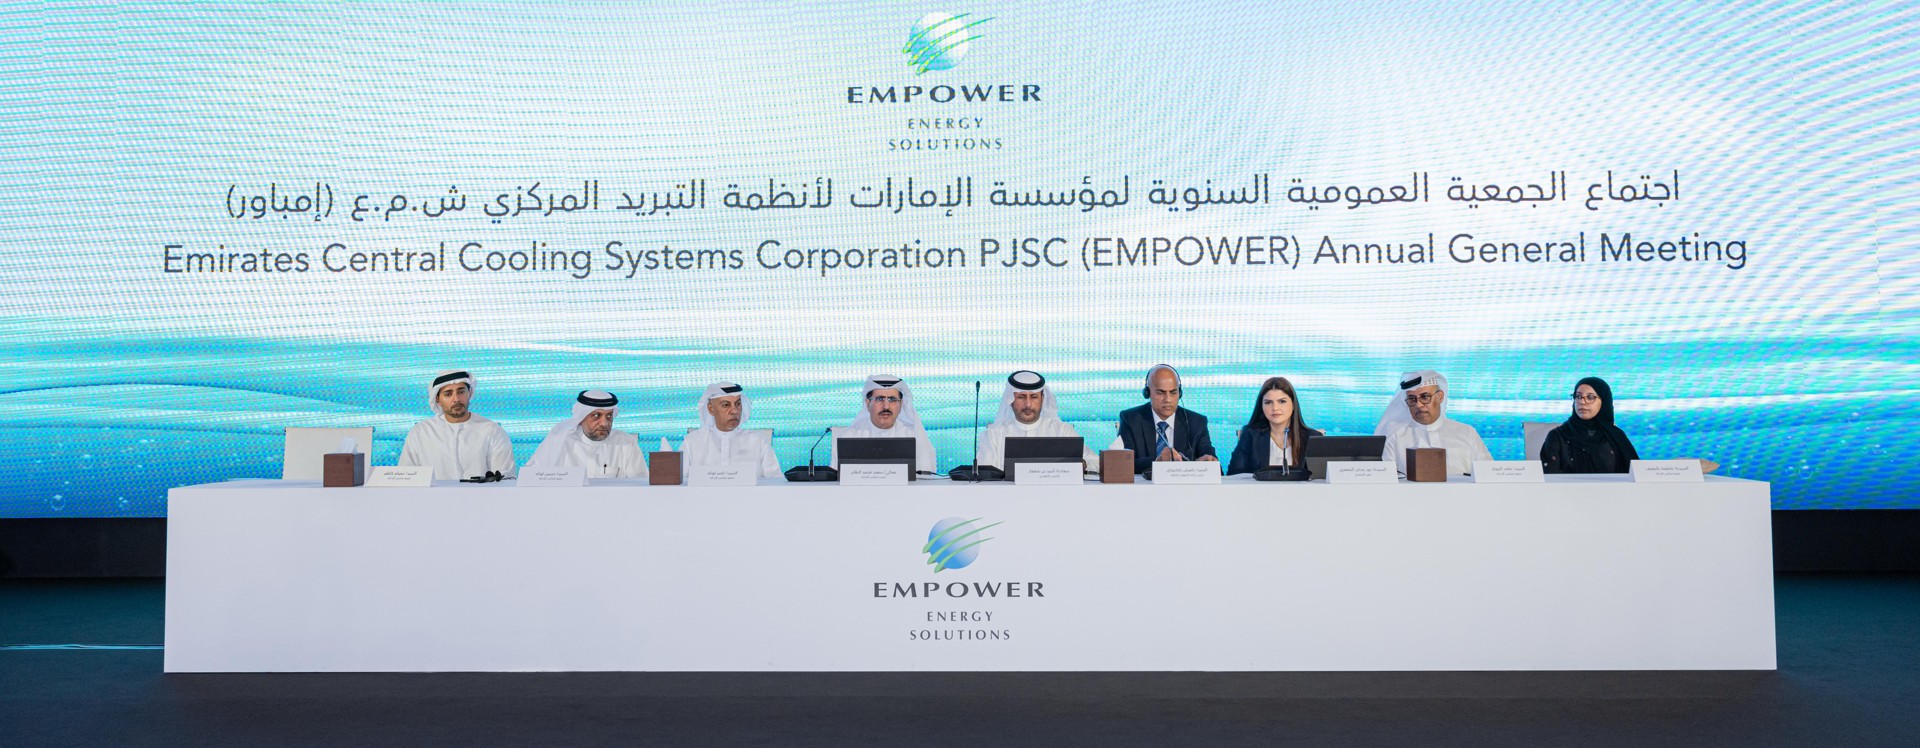 Photo: Empower Annual General Meeting approves AED 425 million dividends to shareholders